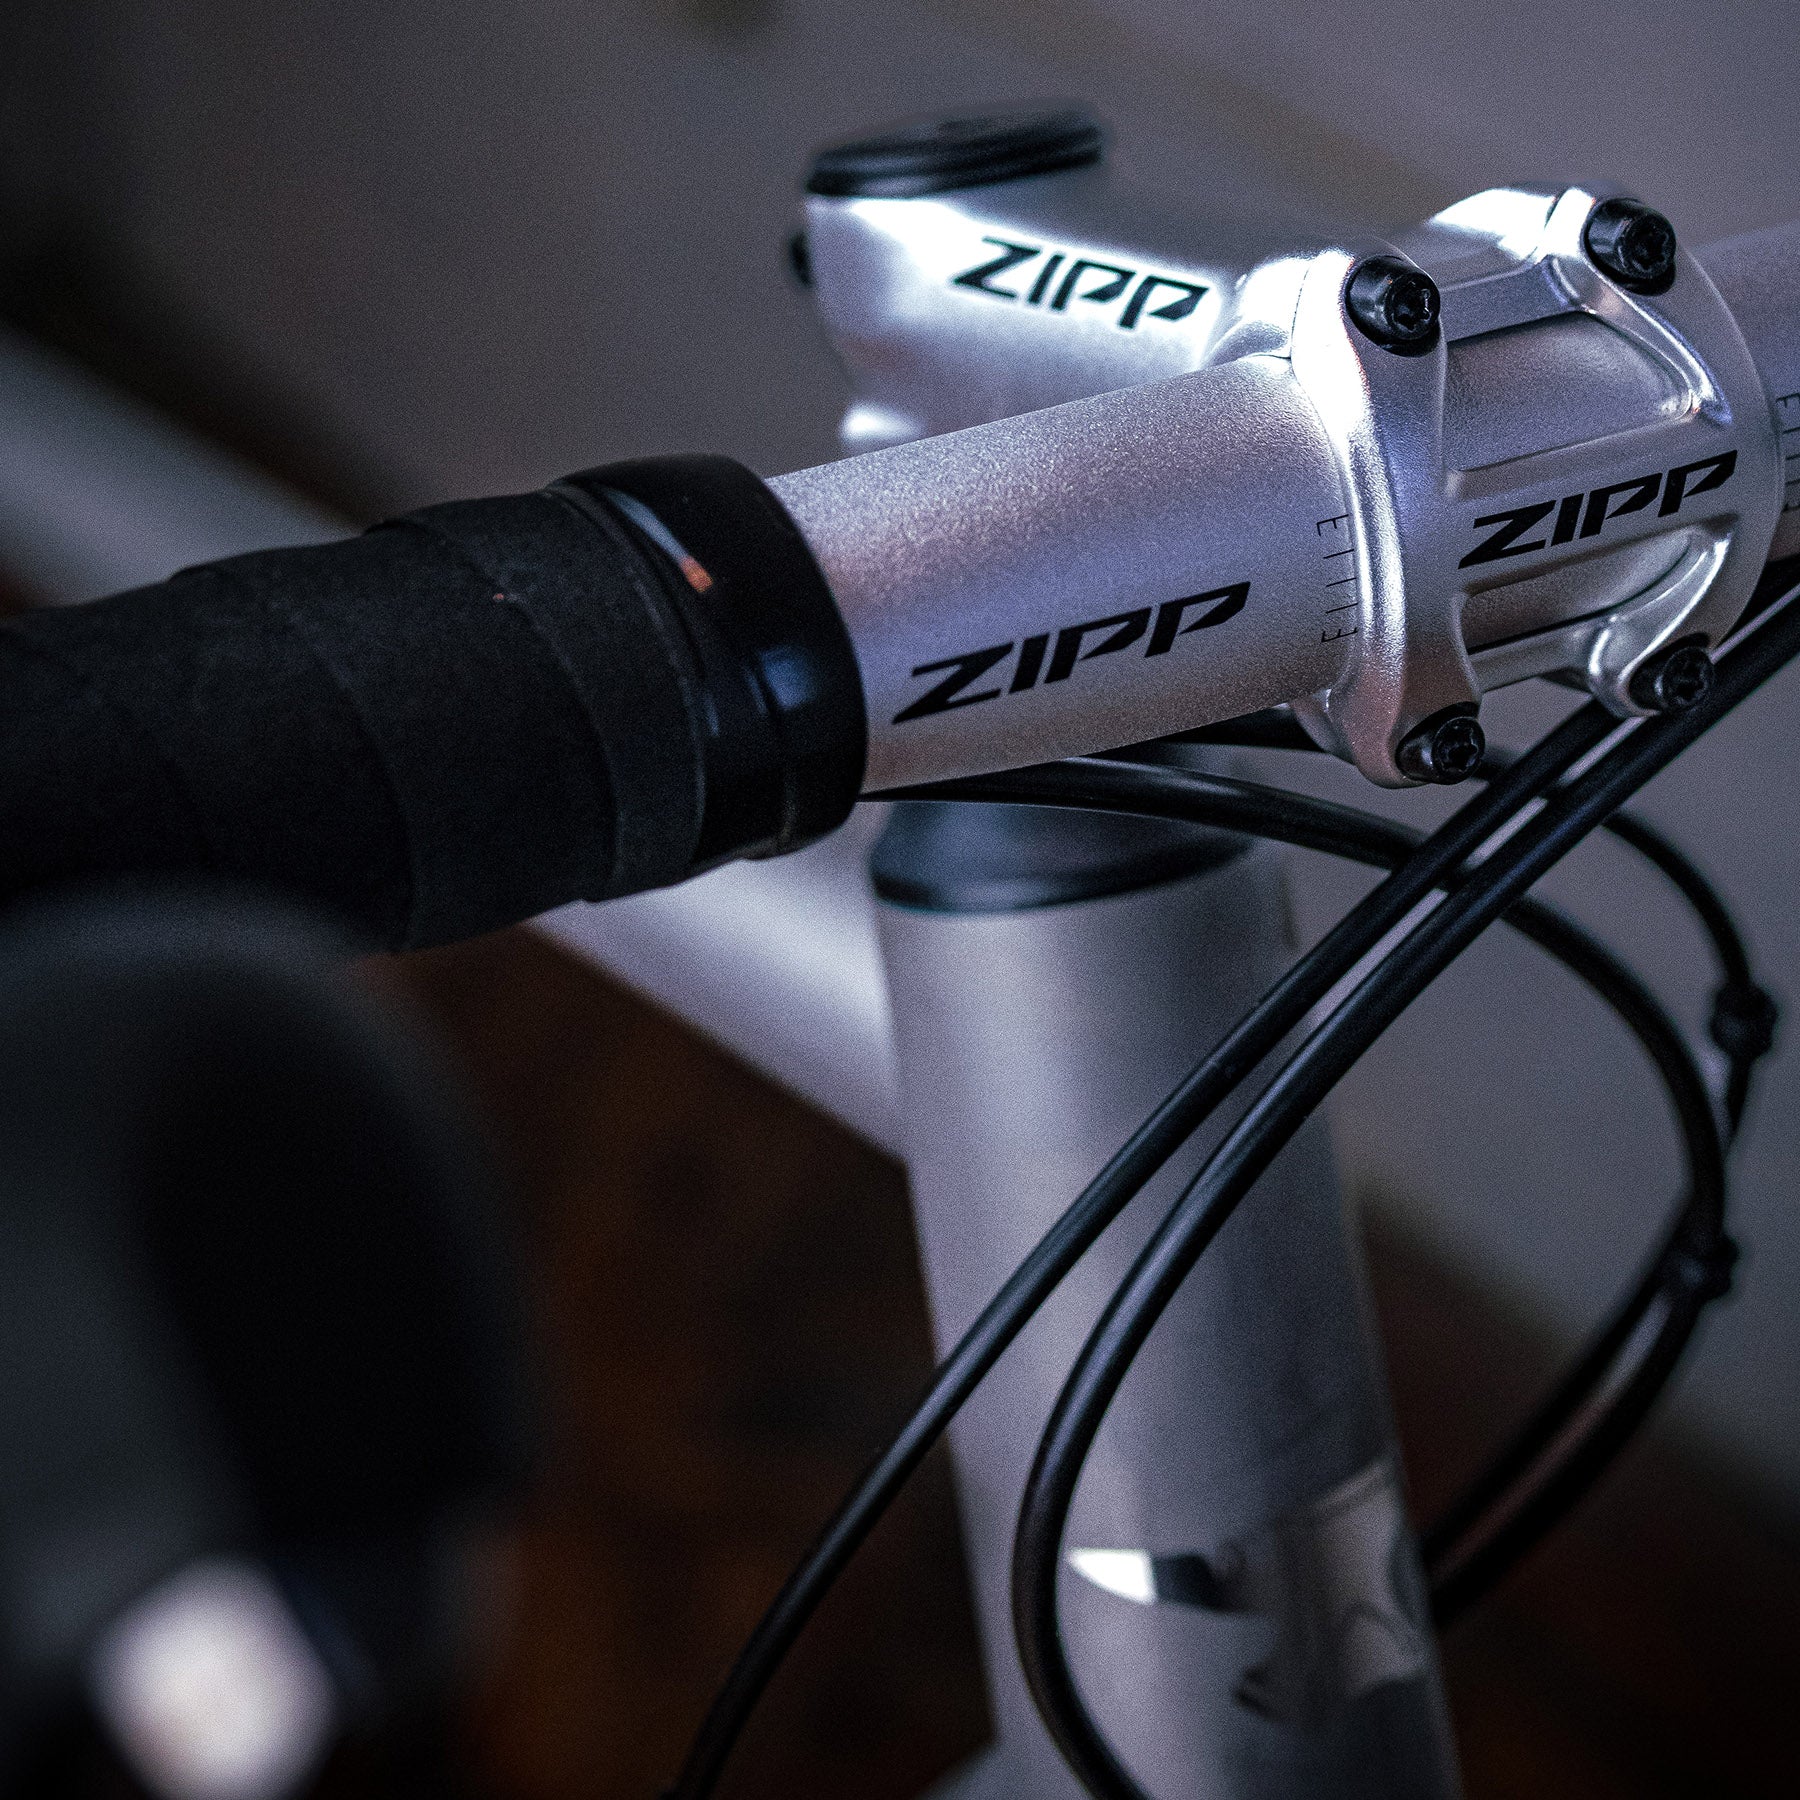 Hero image featuring the front of the handlebars on the BSC Ti road bike